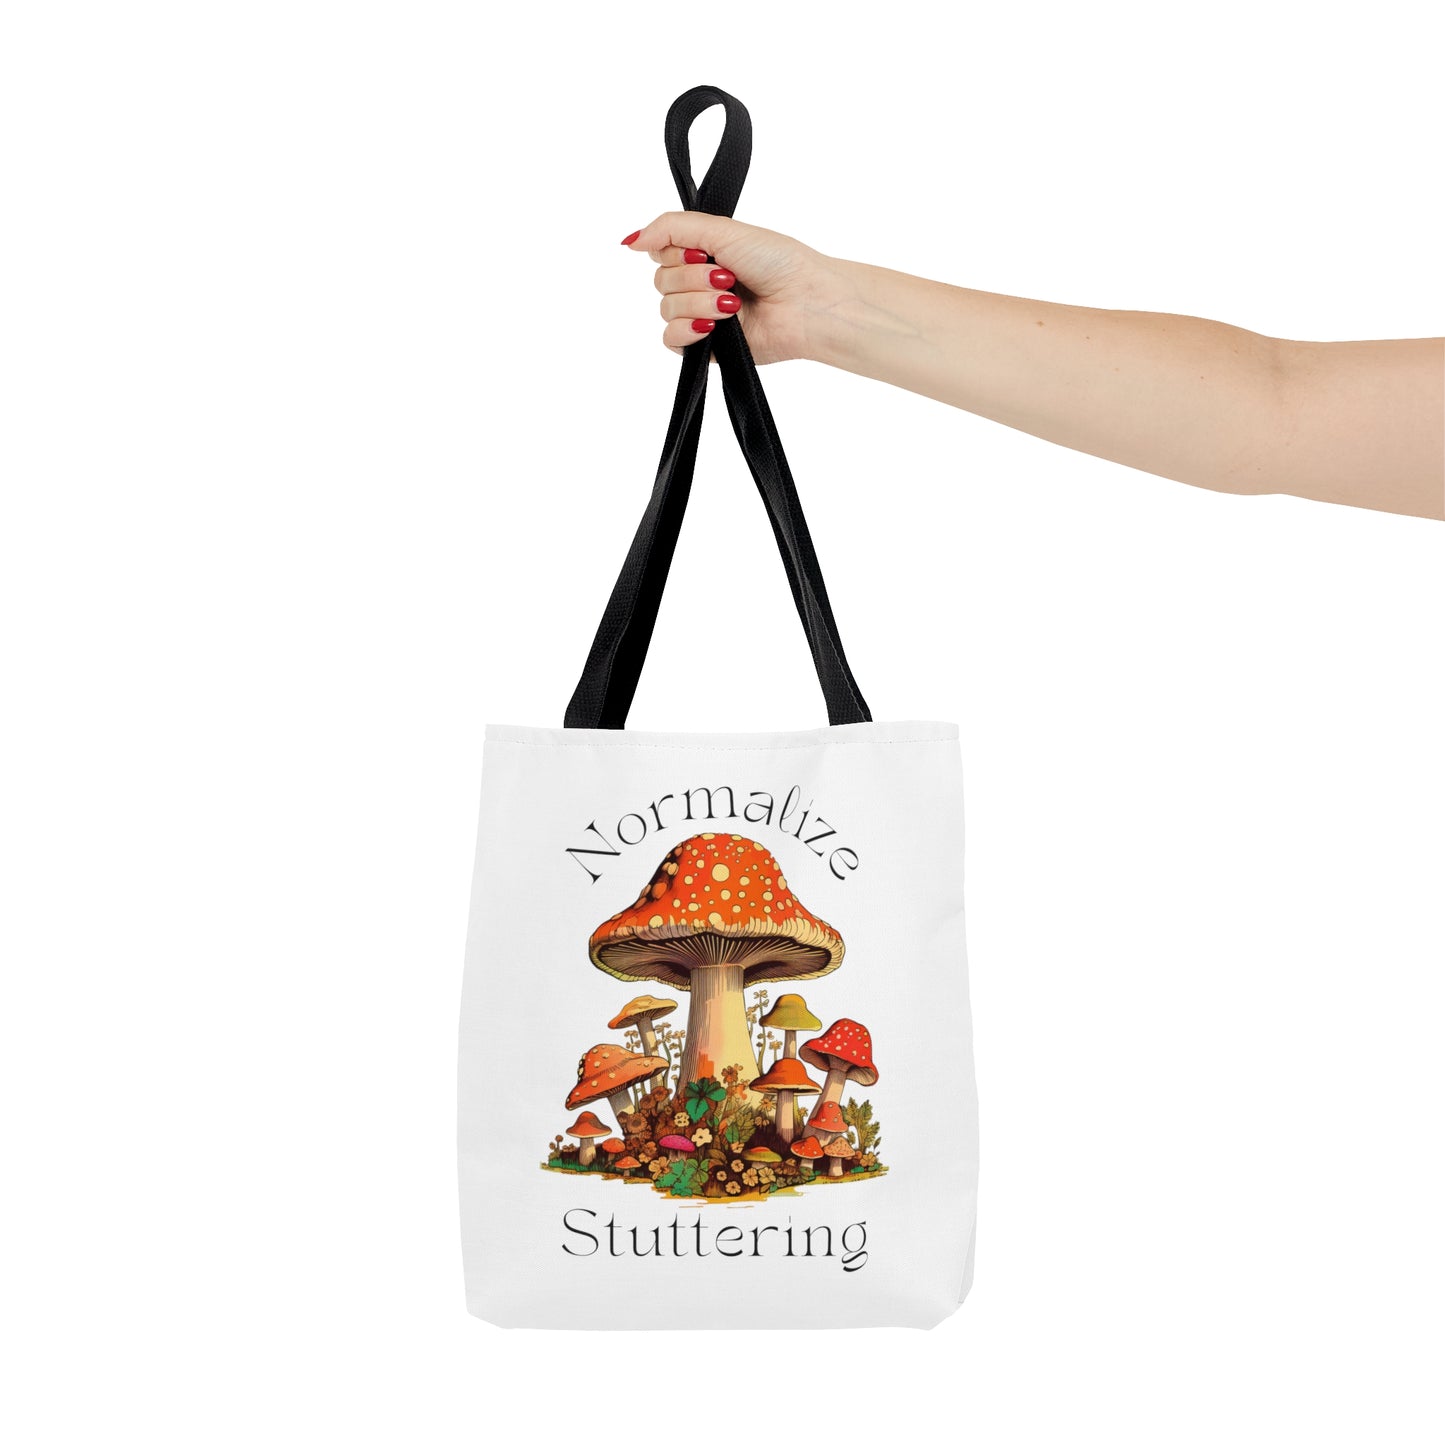 Normalize Stuttering Retro Groovy 70s Mushroom Tote Bag